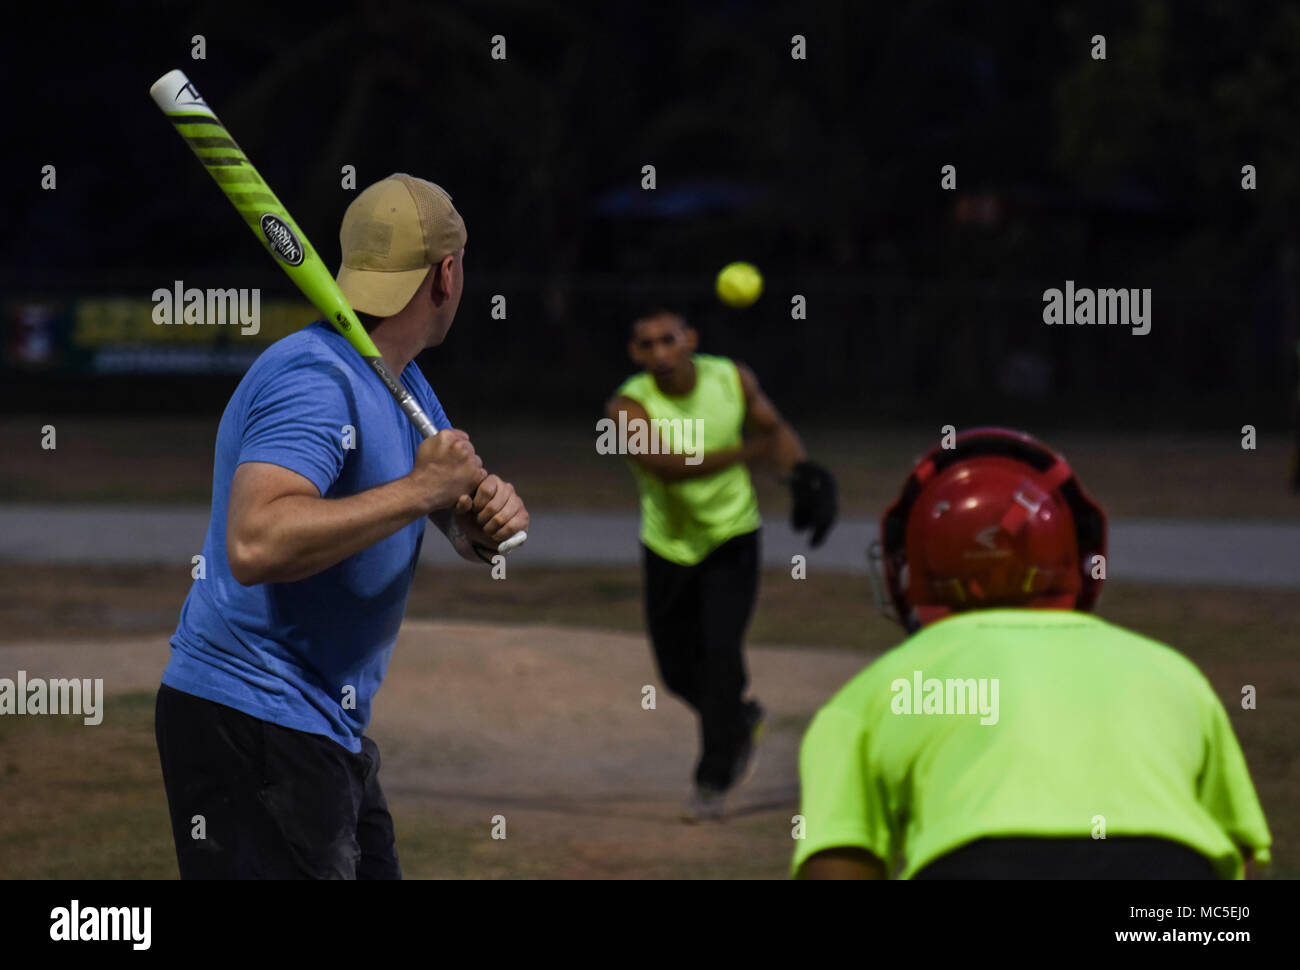 U.S. Air Force Staff Sgt. Eli Smith, 346th Air Expeditionary Group public affairs team member, prepares to hit a softball during a game April 1, 2018, in Meteti, Panama. During the exercise, aimed at training U.S. military members and assisting partner nations, exercise personnel also spend down time playing sports, participating in local events and interacting with locals to build relationships and promote U.S. and Panamanian partnership. Exercise New Horizons is a joint training exercise where all branches of the U.S. military conduct training in civil engineer, medical and support services  Stock Photo